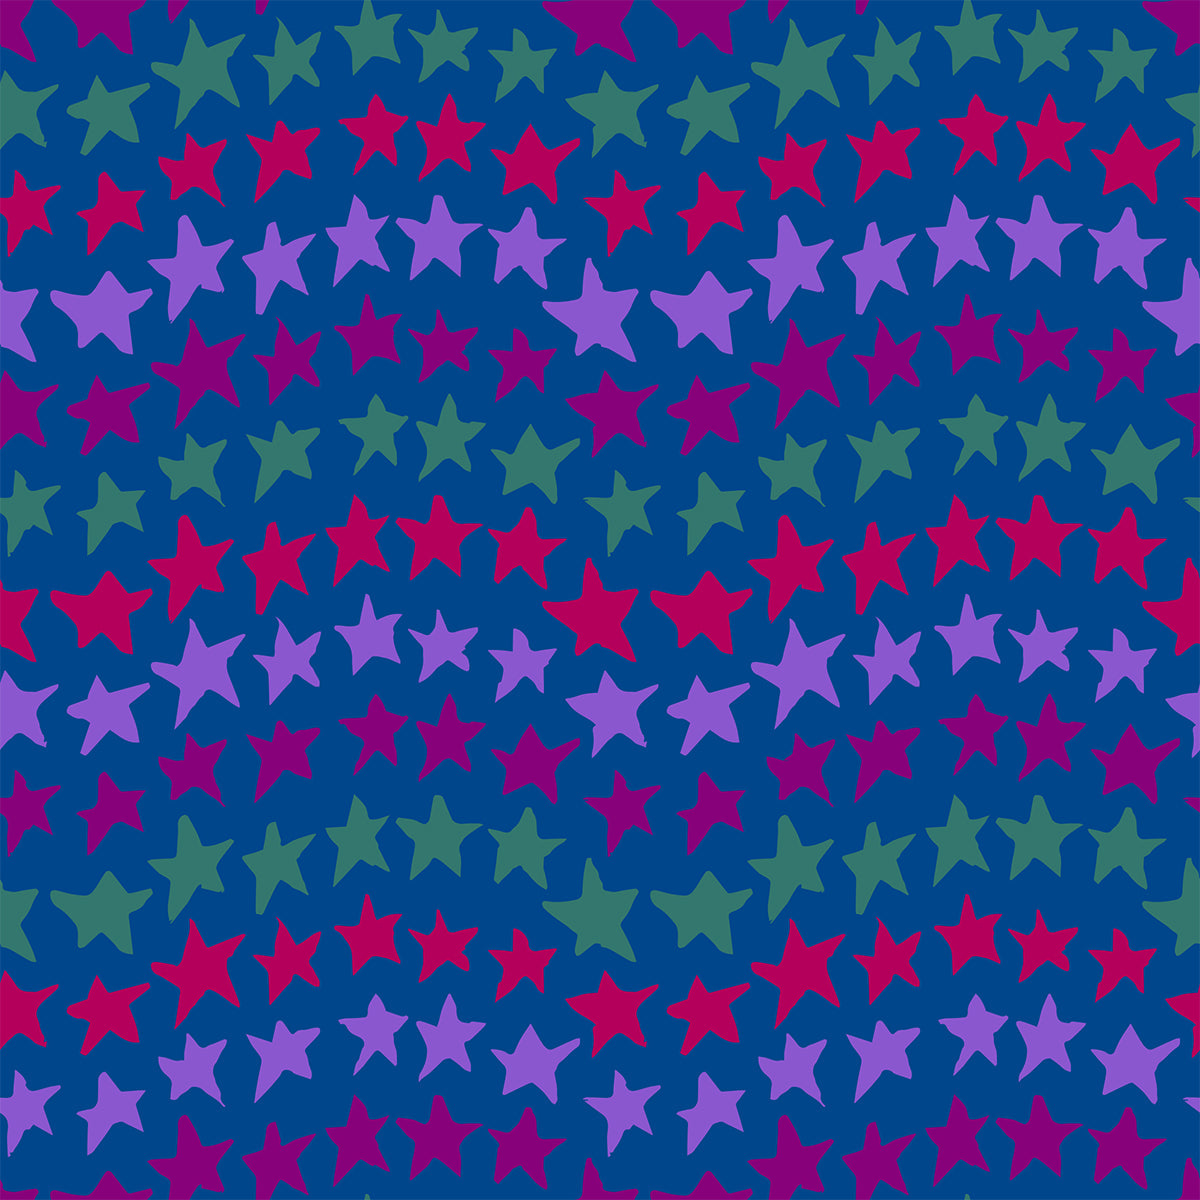 Rock on Stars Berry features a repeating pattern in dusty blue, red, purple, and berry colors of undulating rows of stars.